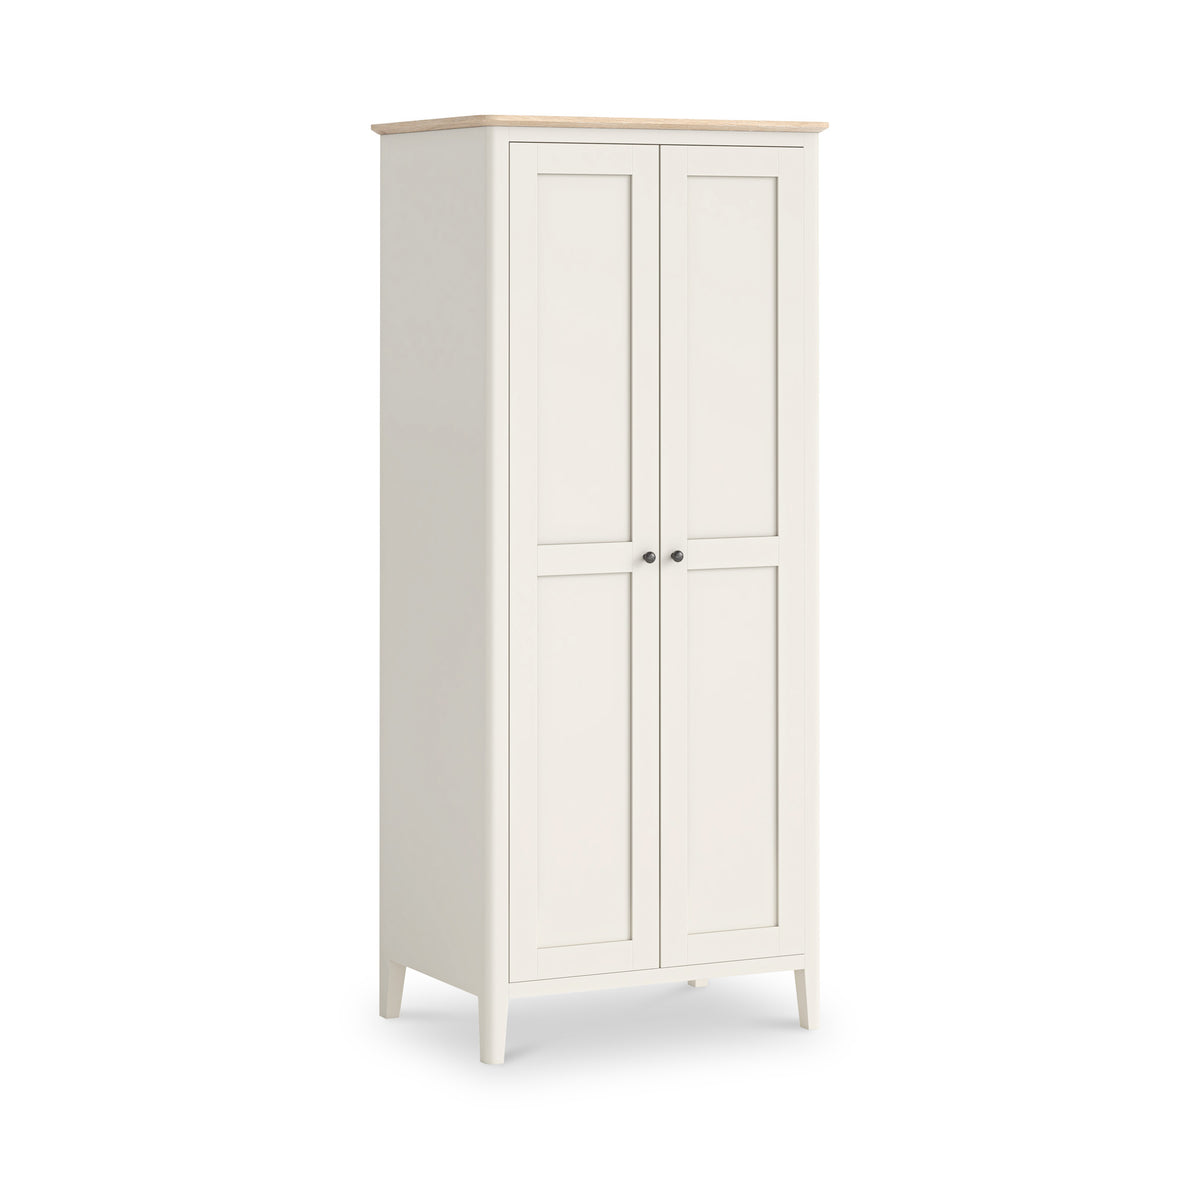 Penrose Coconut White Full Hanging Wardrobe with metal handles from Roseland Furniture